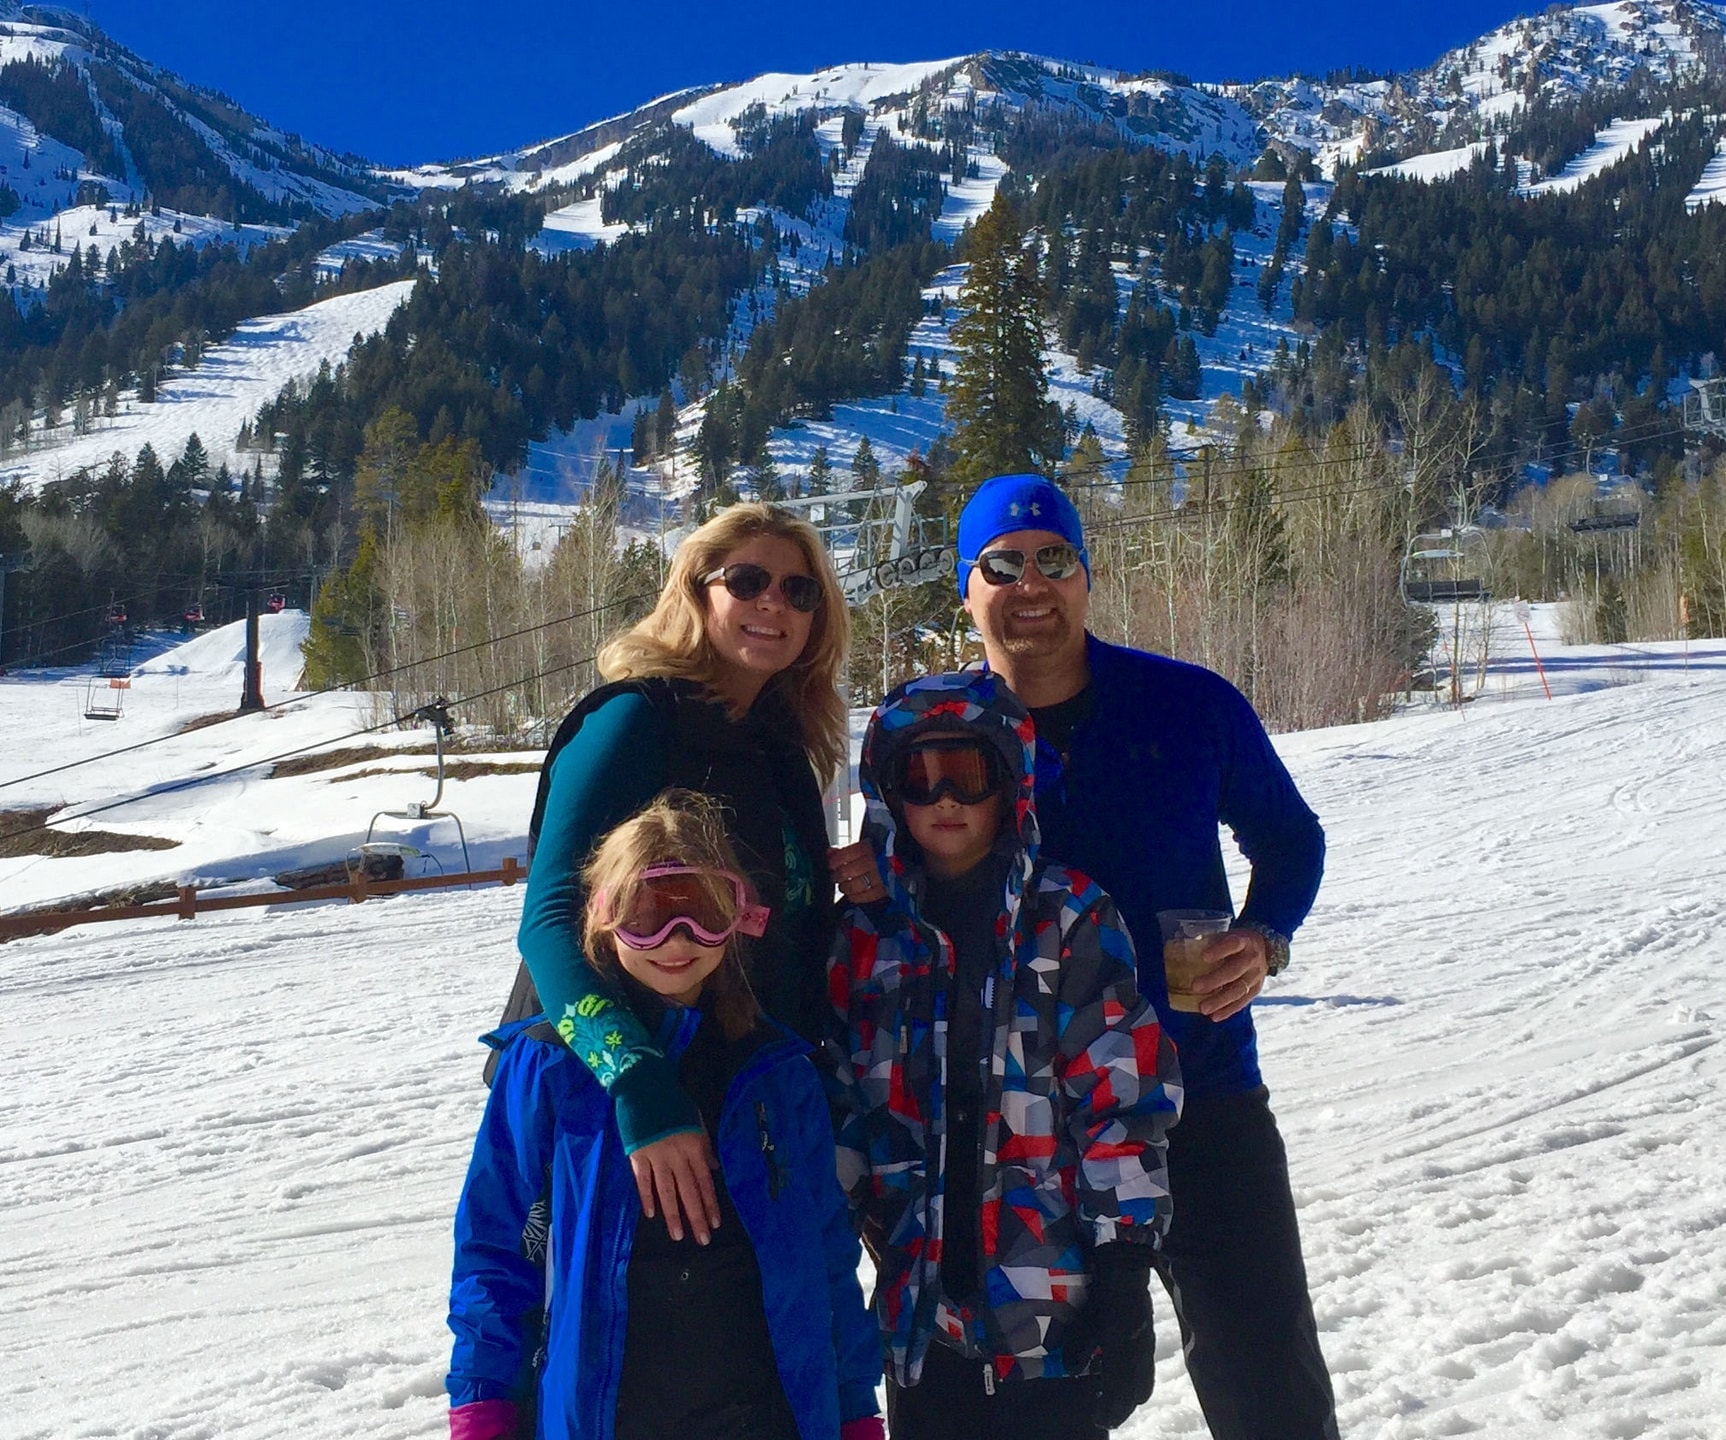 Dr. Chip Parrish and his wife Jennifer share a practice in the Texas Hill Country. Here they take on Jackson Hole, Wyoming for a family vacation.https://viewer.zmags.com/publication/9975d83d#/9975d83d/80